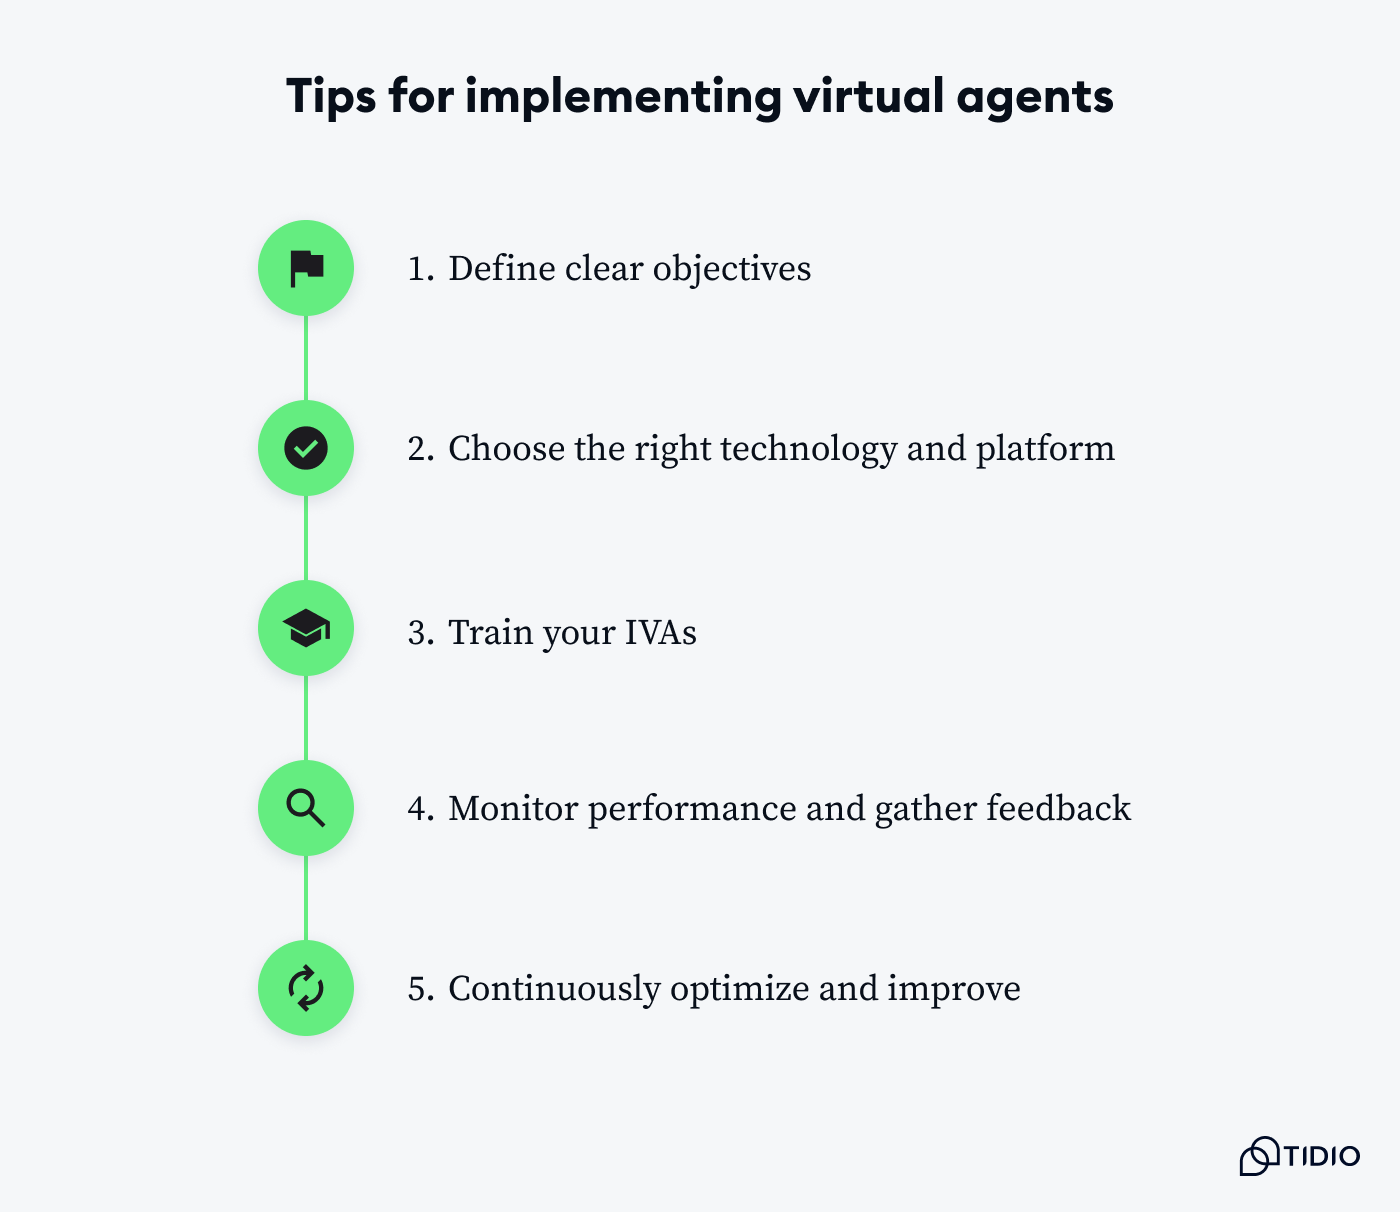 Tips for implementing virtual agents